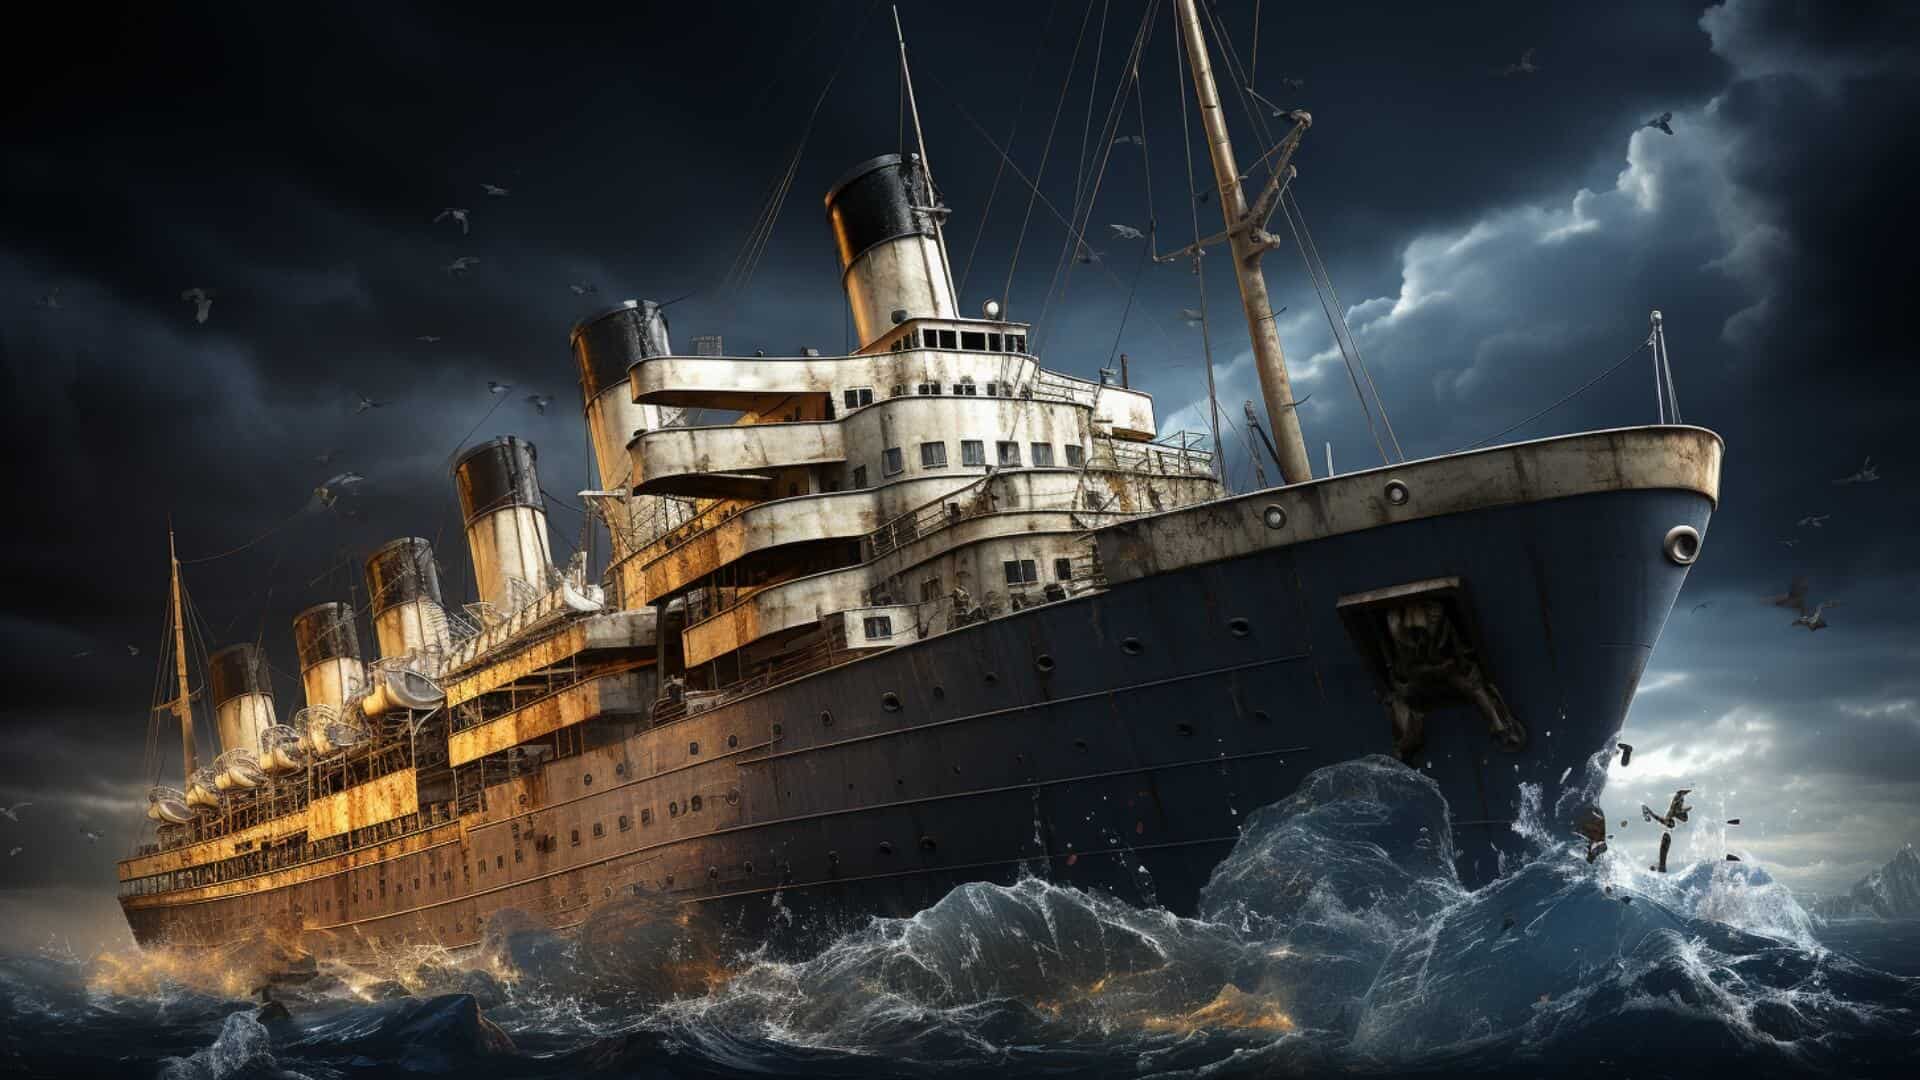 OceanGate Titan Submersible Incident as a Metaphor for Real Estate Investing (Risk, Reward, and Adventure) image of Titanic ship at sea in rough, stormy waters, many birds in the sky, at night